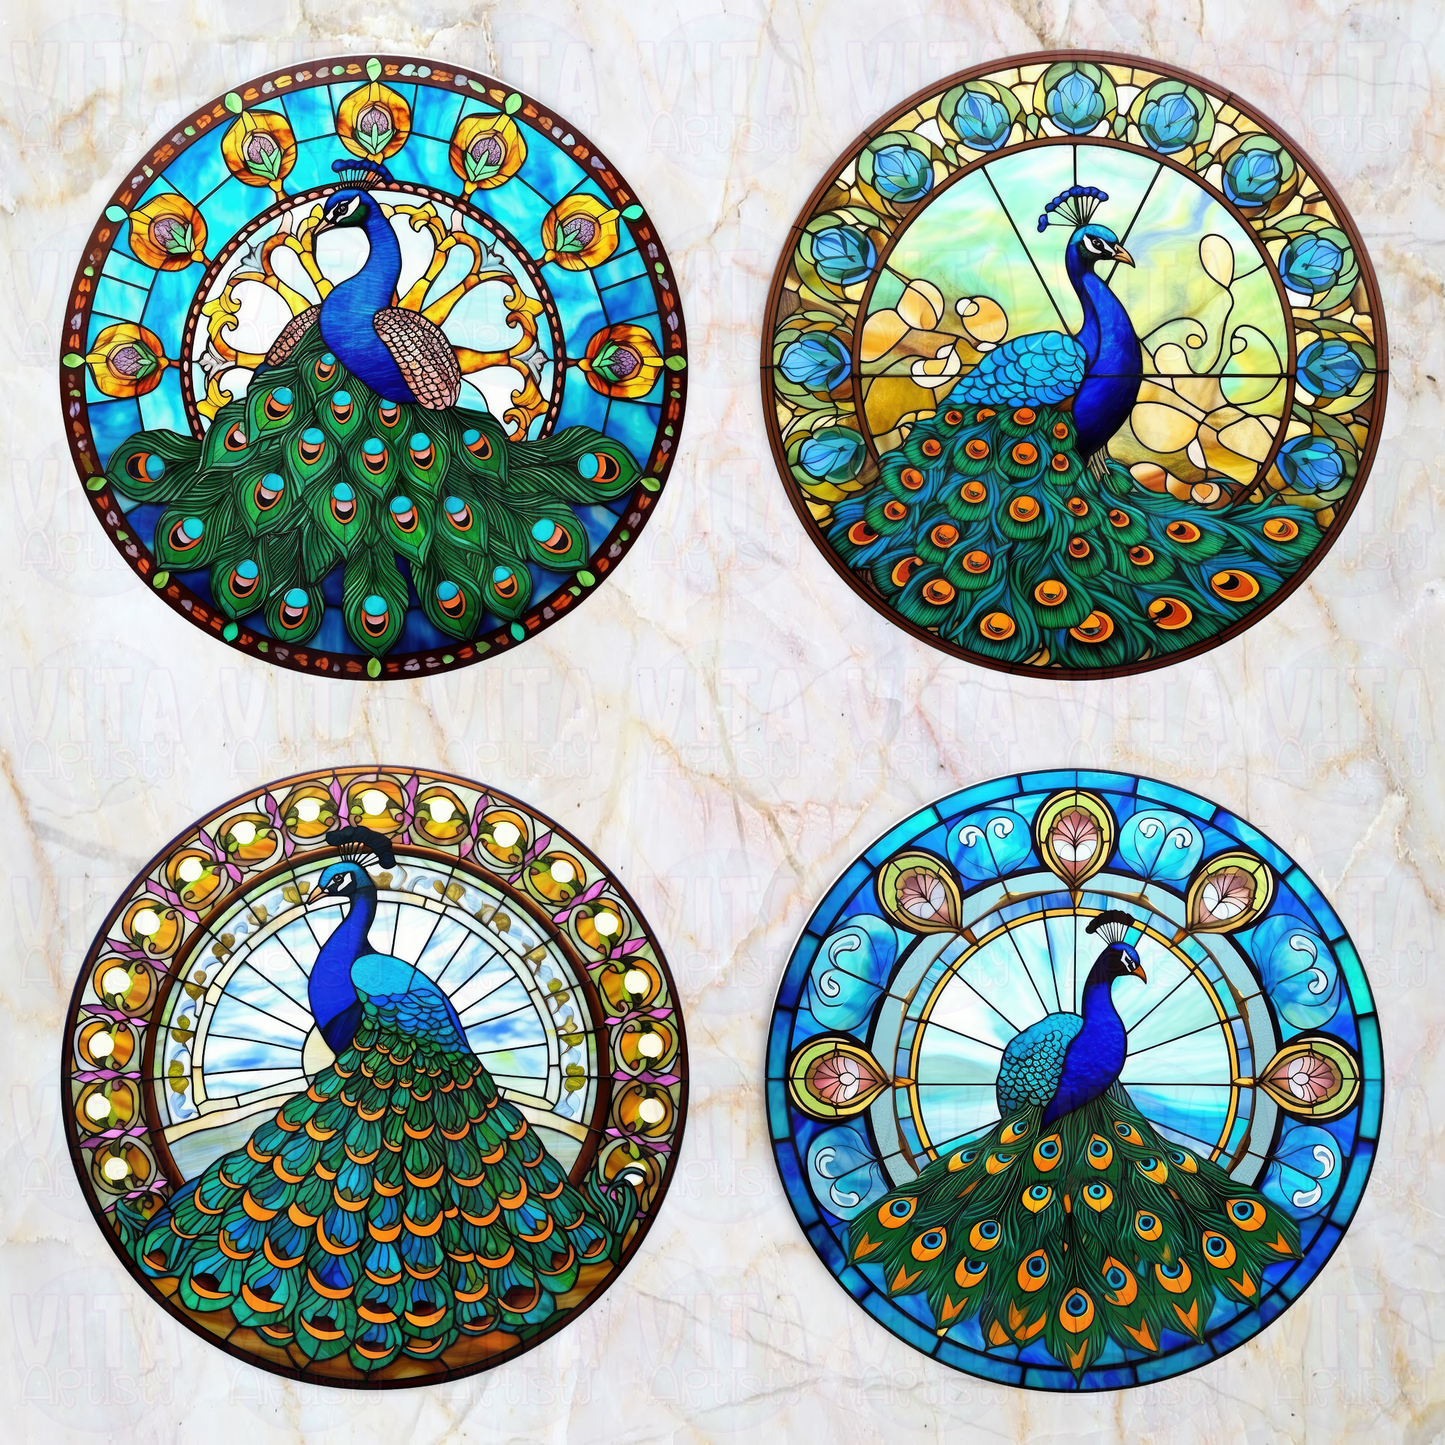 Faux Stained Glass Peacocks - Ceramic Coaster Set